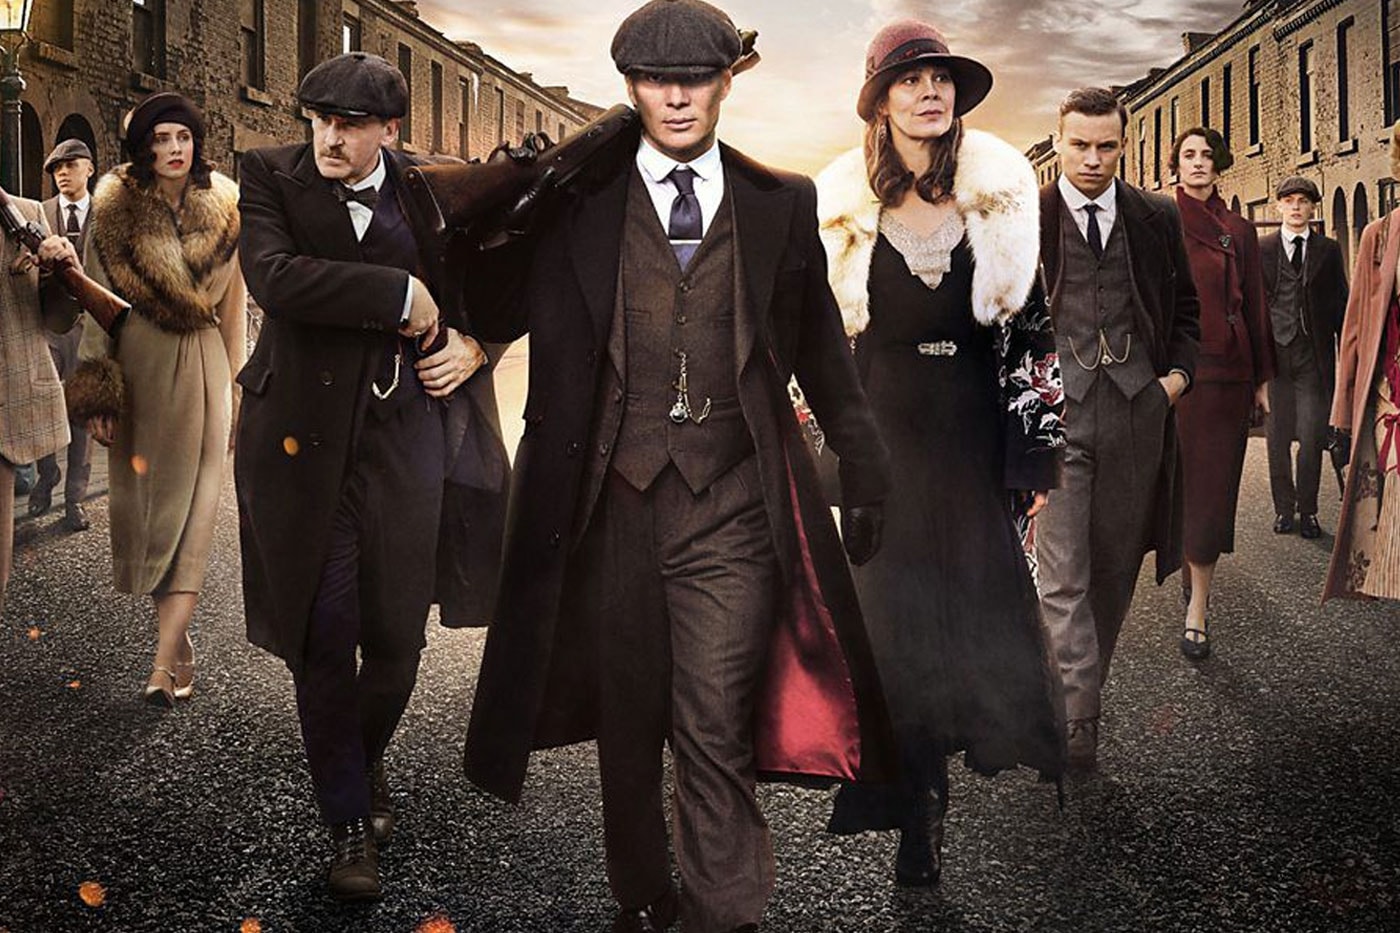 'Peaky Blinders' Creator Reveals How New Characters Help Set the Stage for Upcoming Movie steven knight netflix cillian murphy arthur shelby period piece 